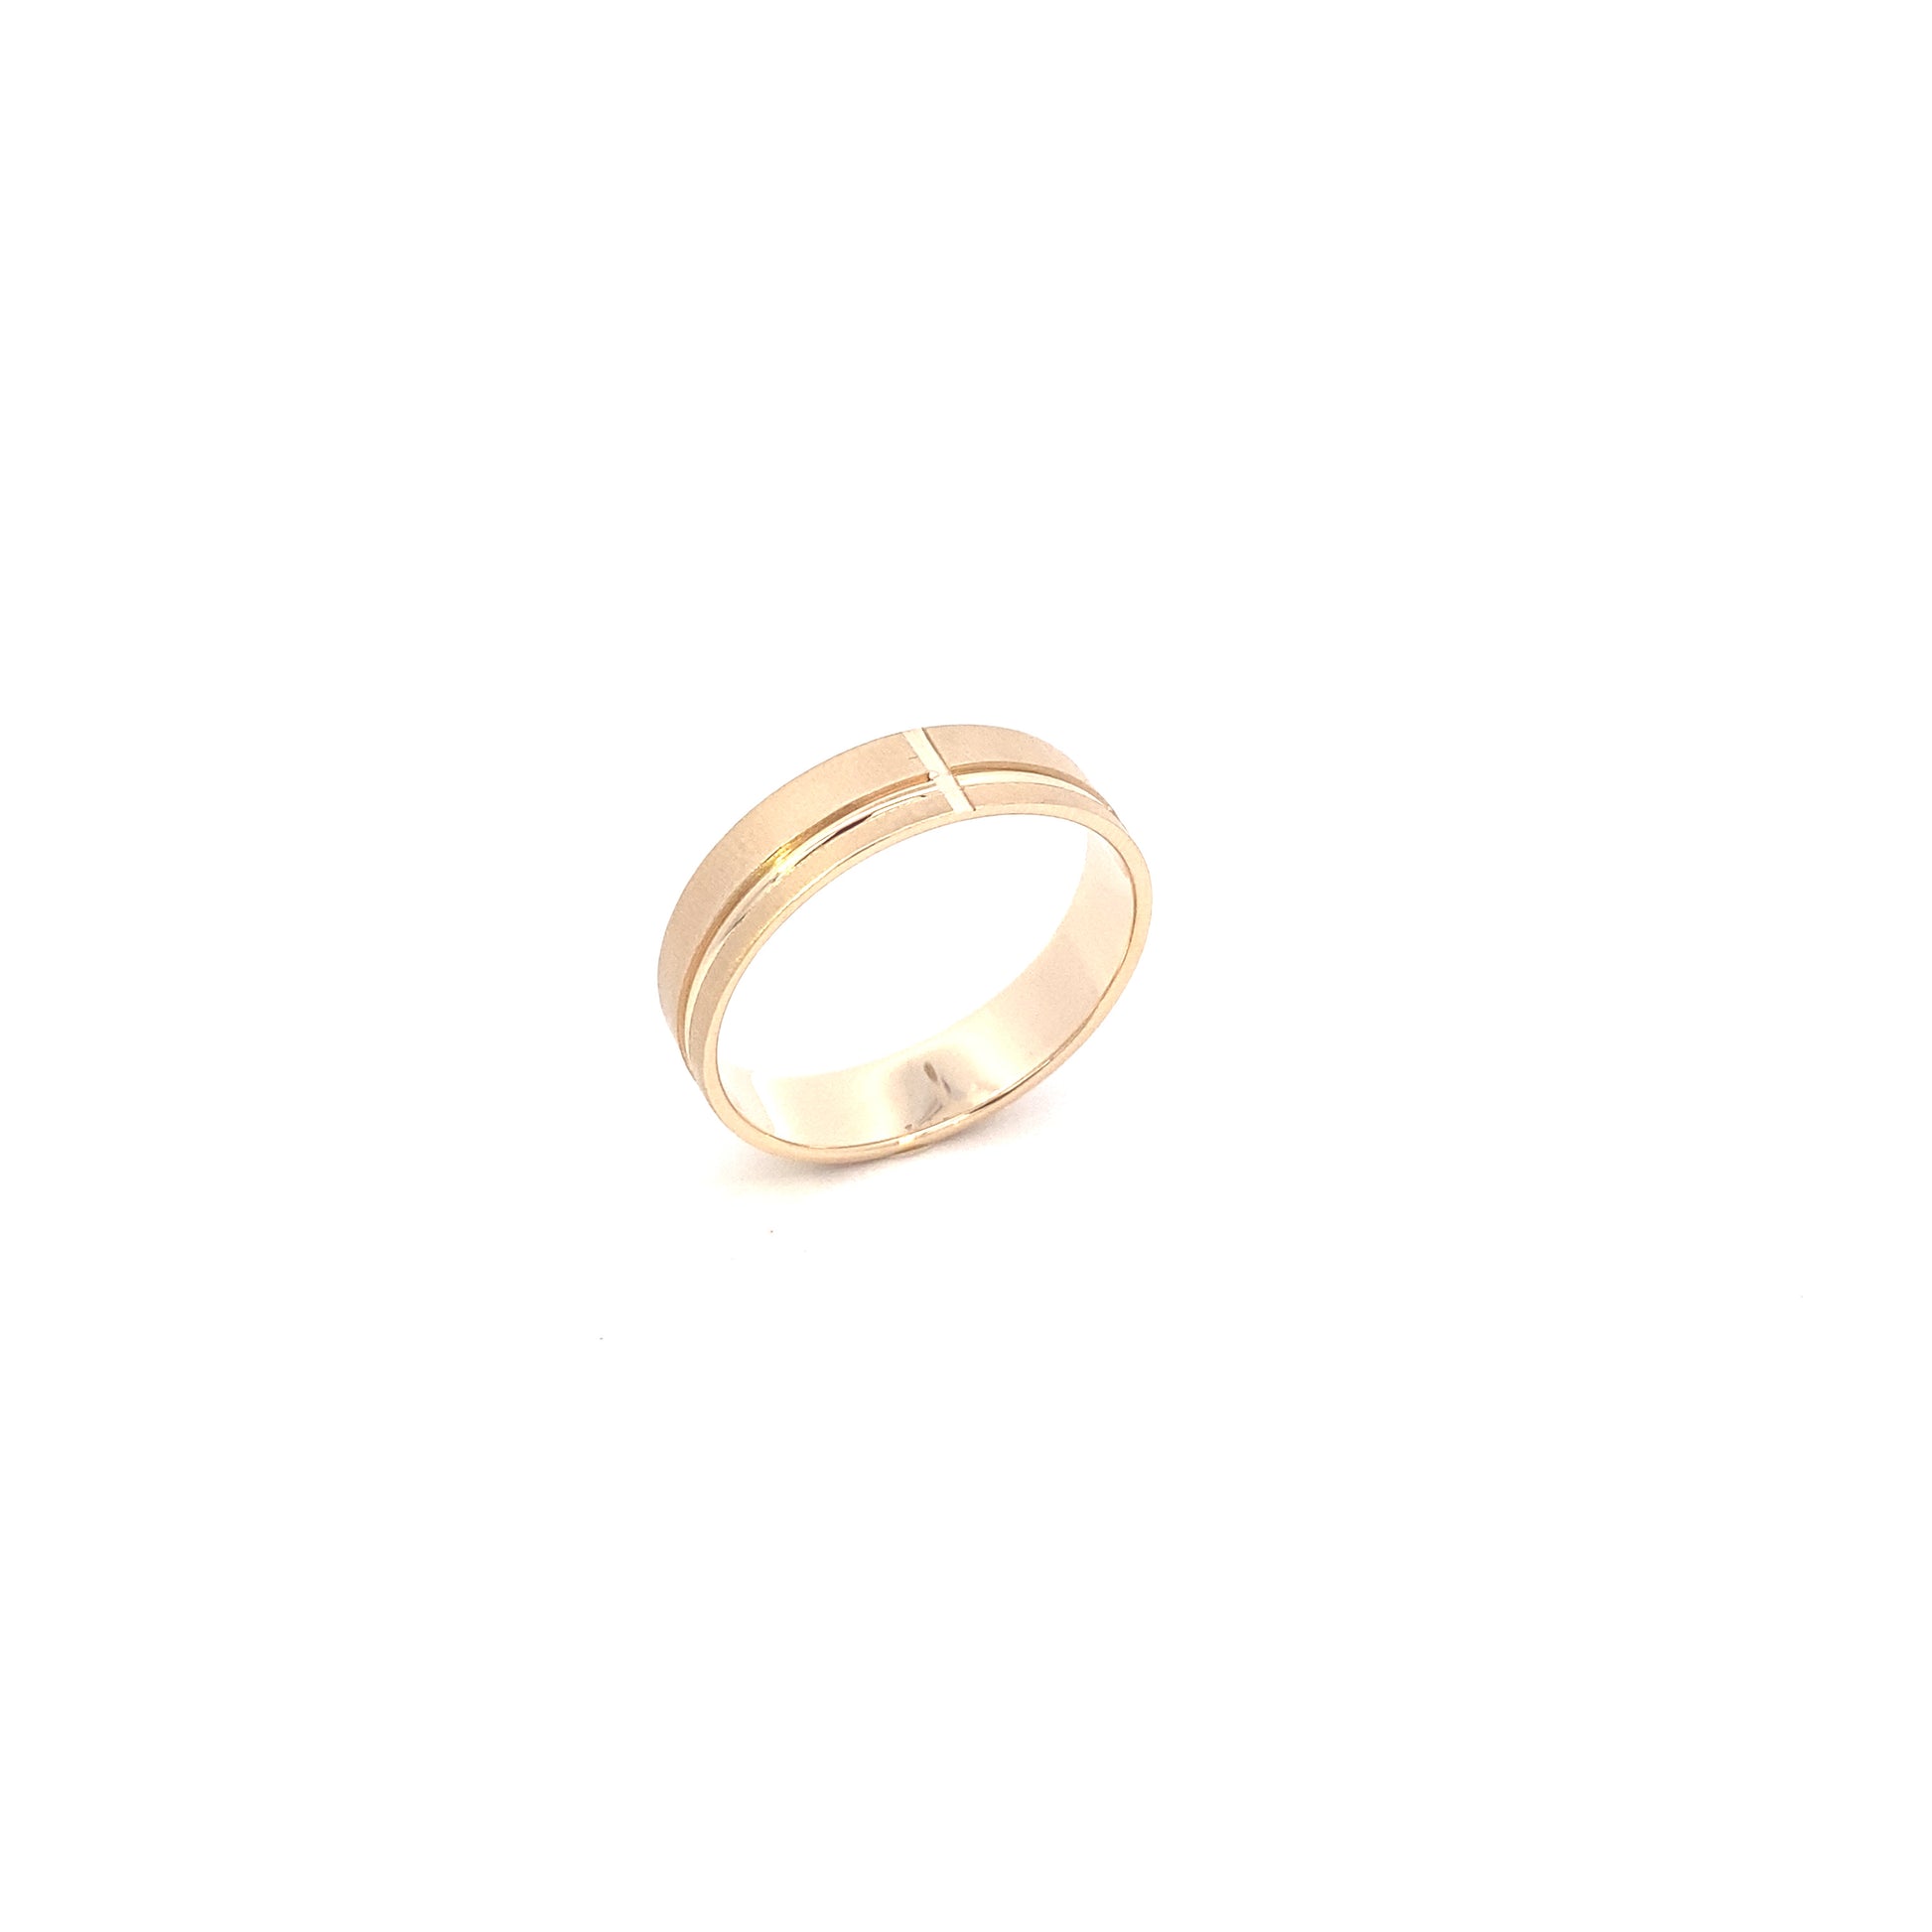 14K Gold Wedding Bands | Luby Gold Collection | Luby 